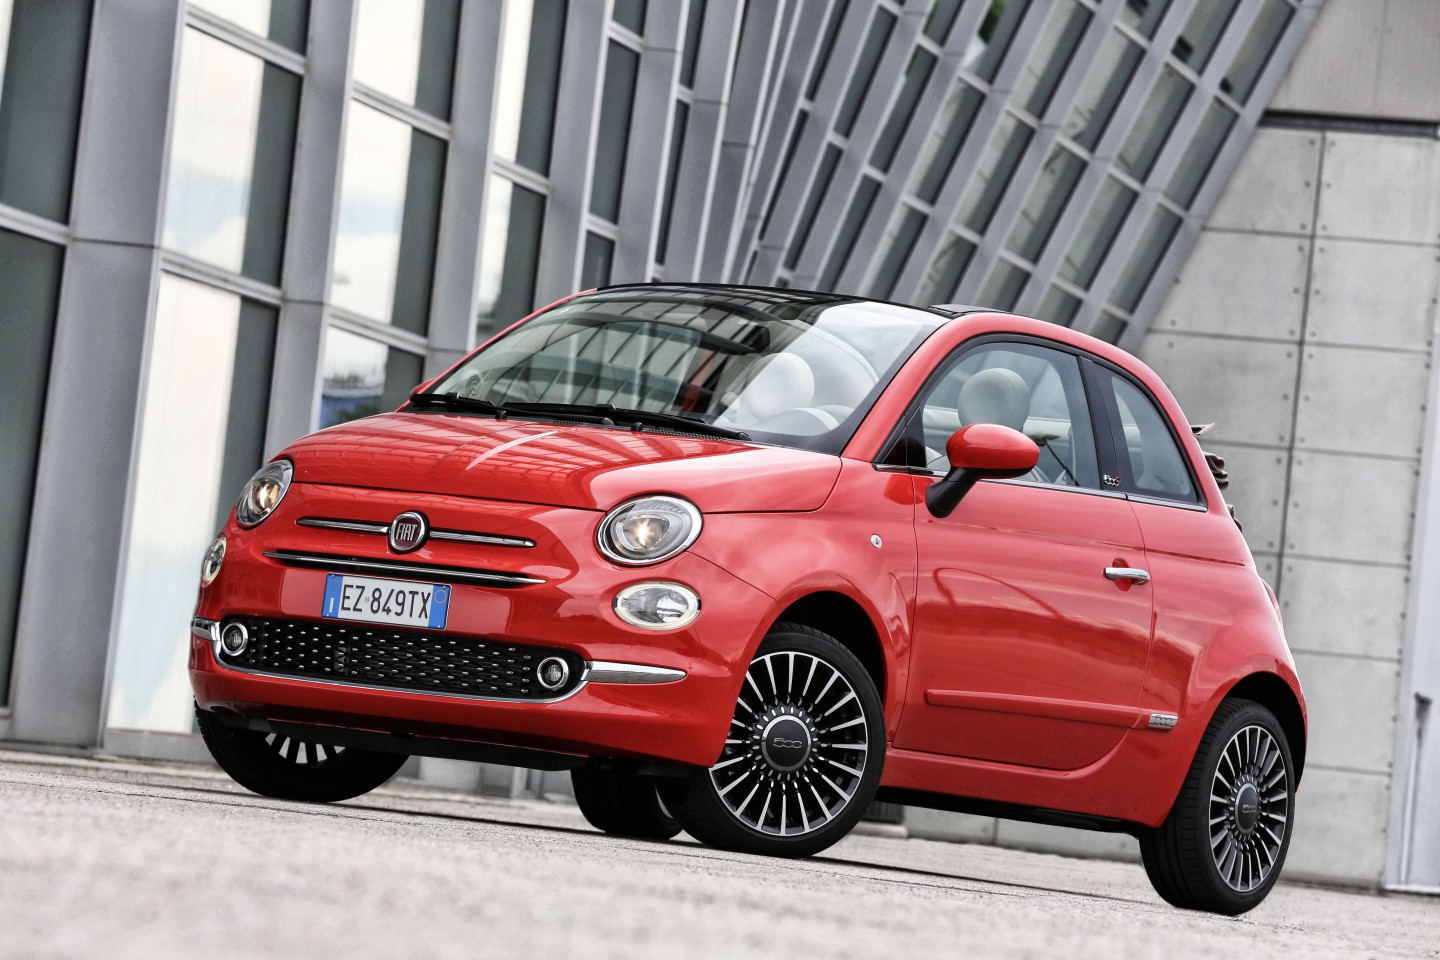 The best city cars: Fiat 500